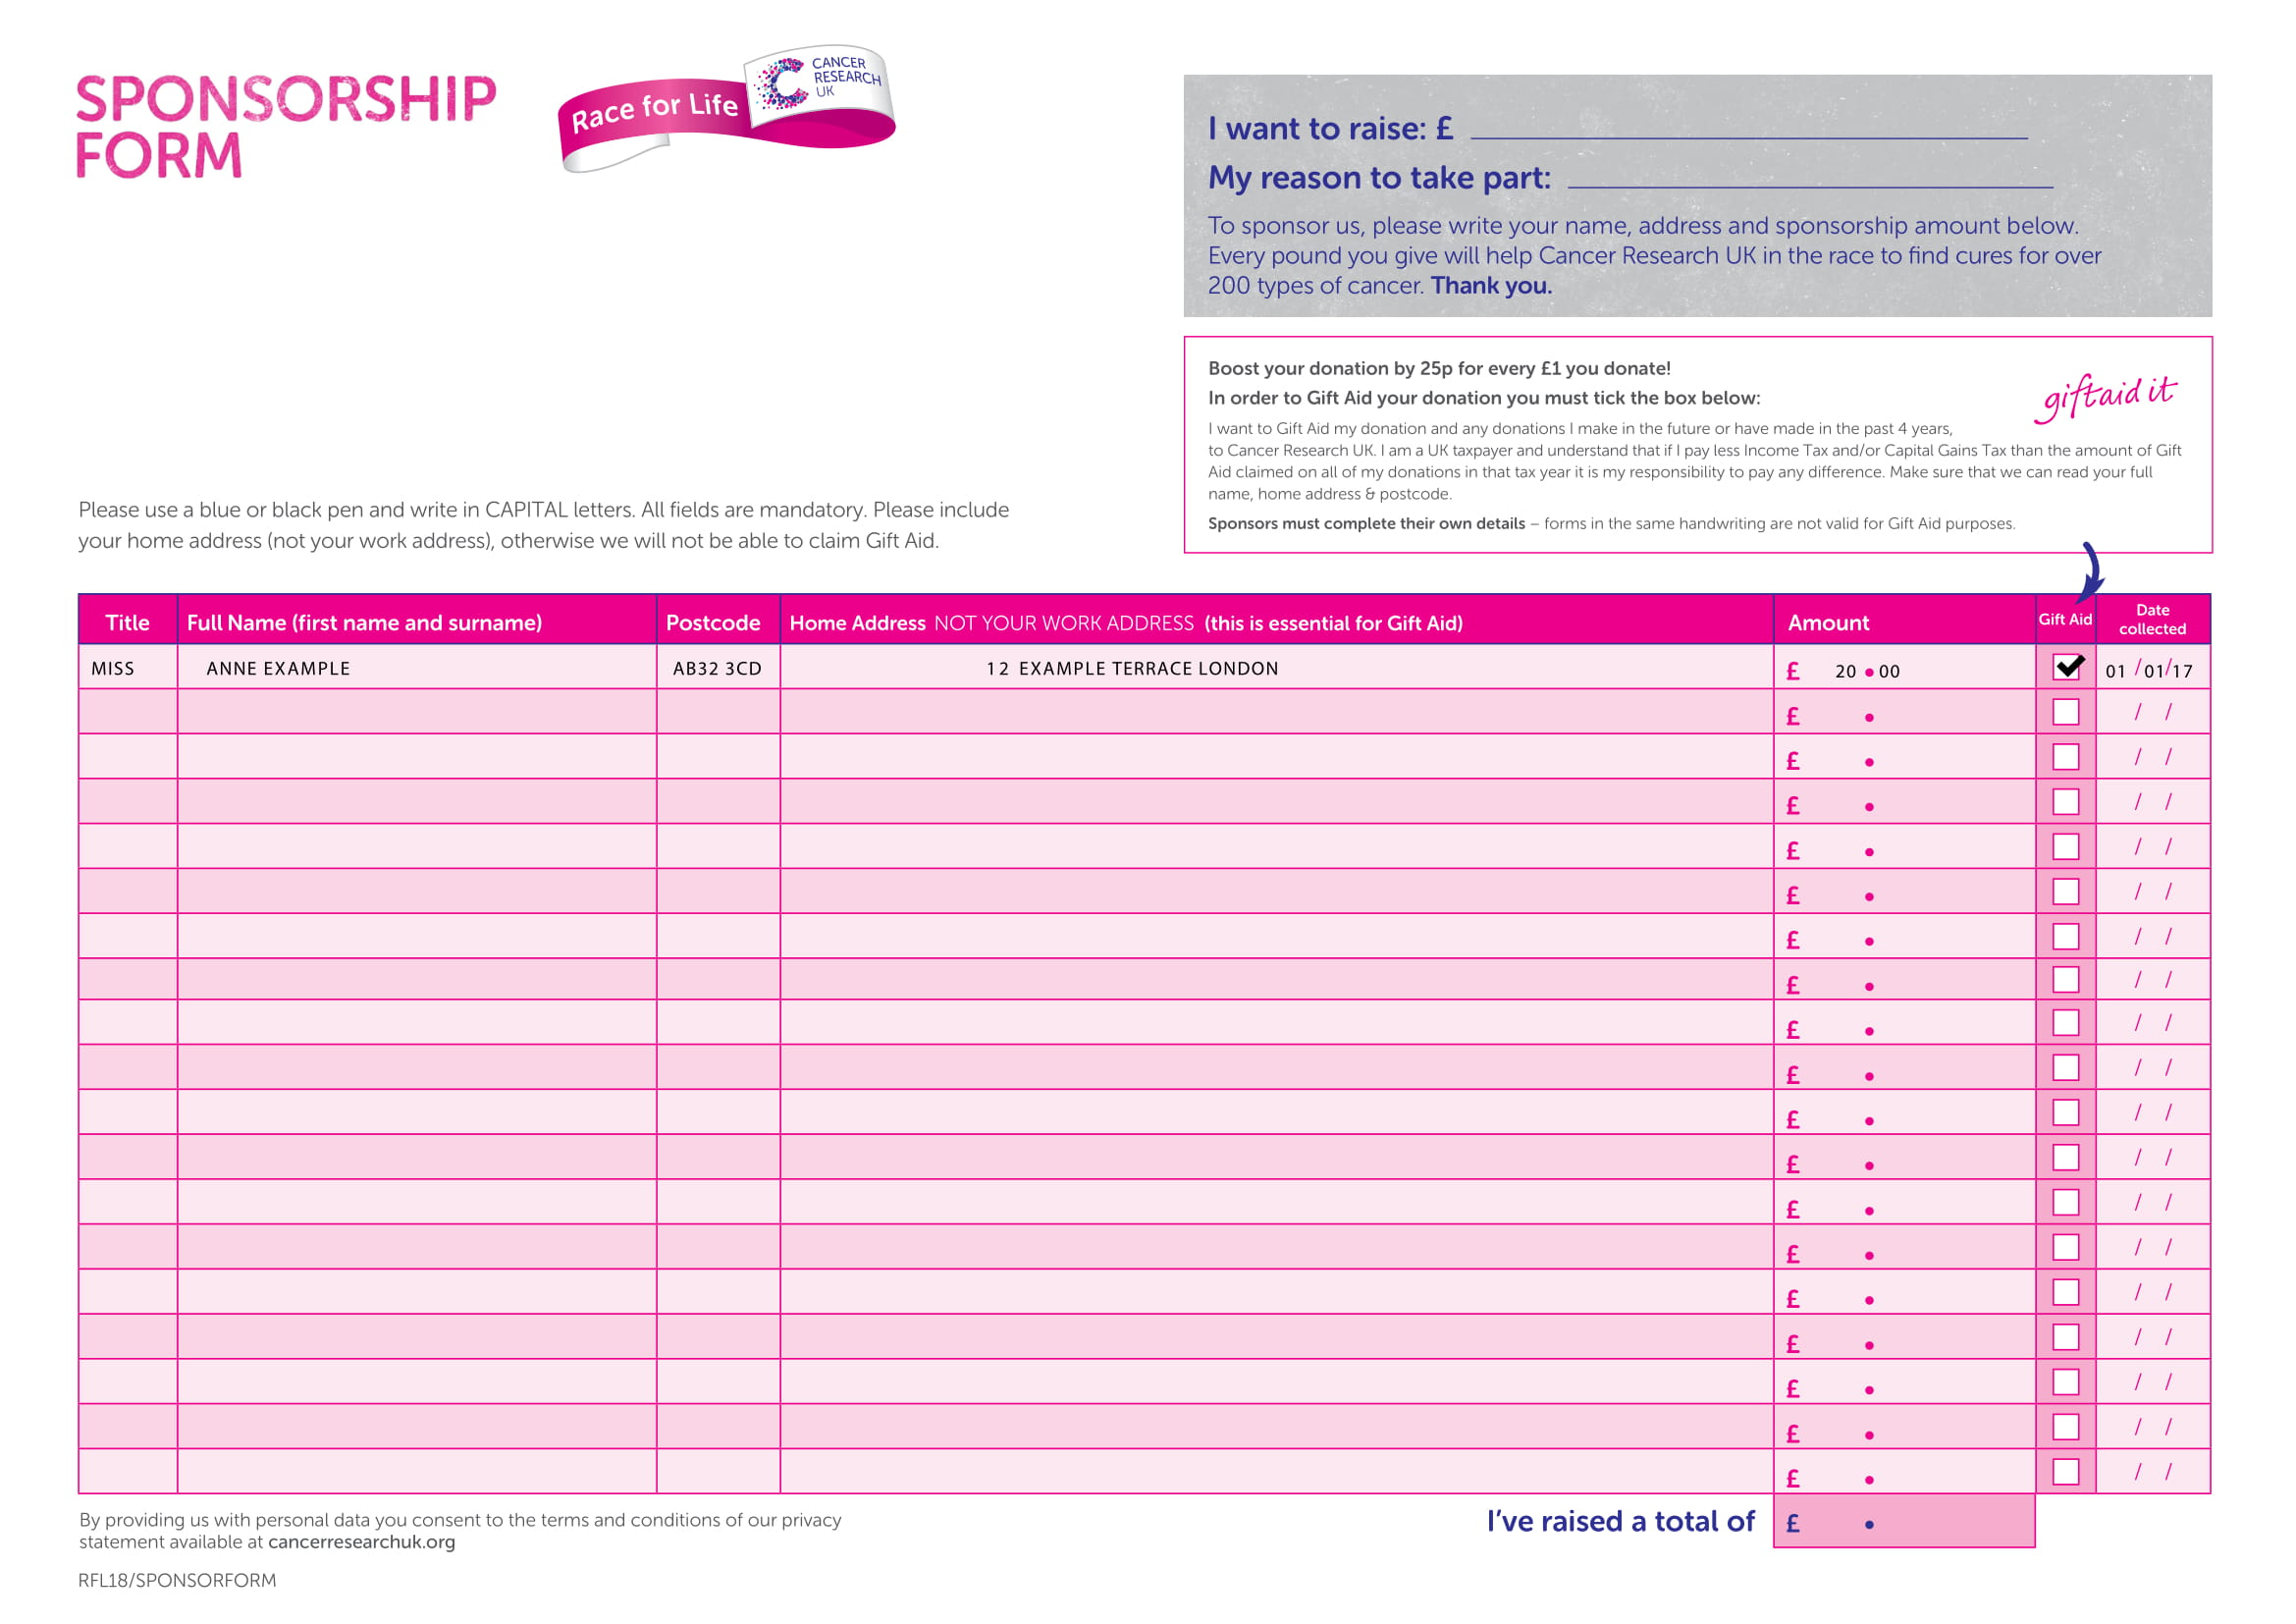 Return Your Sponsorship Race For Life Cancer Research UK